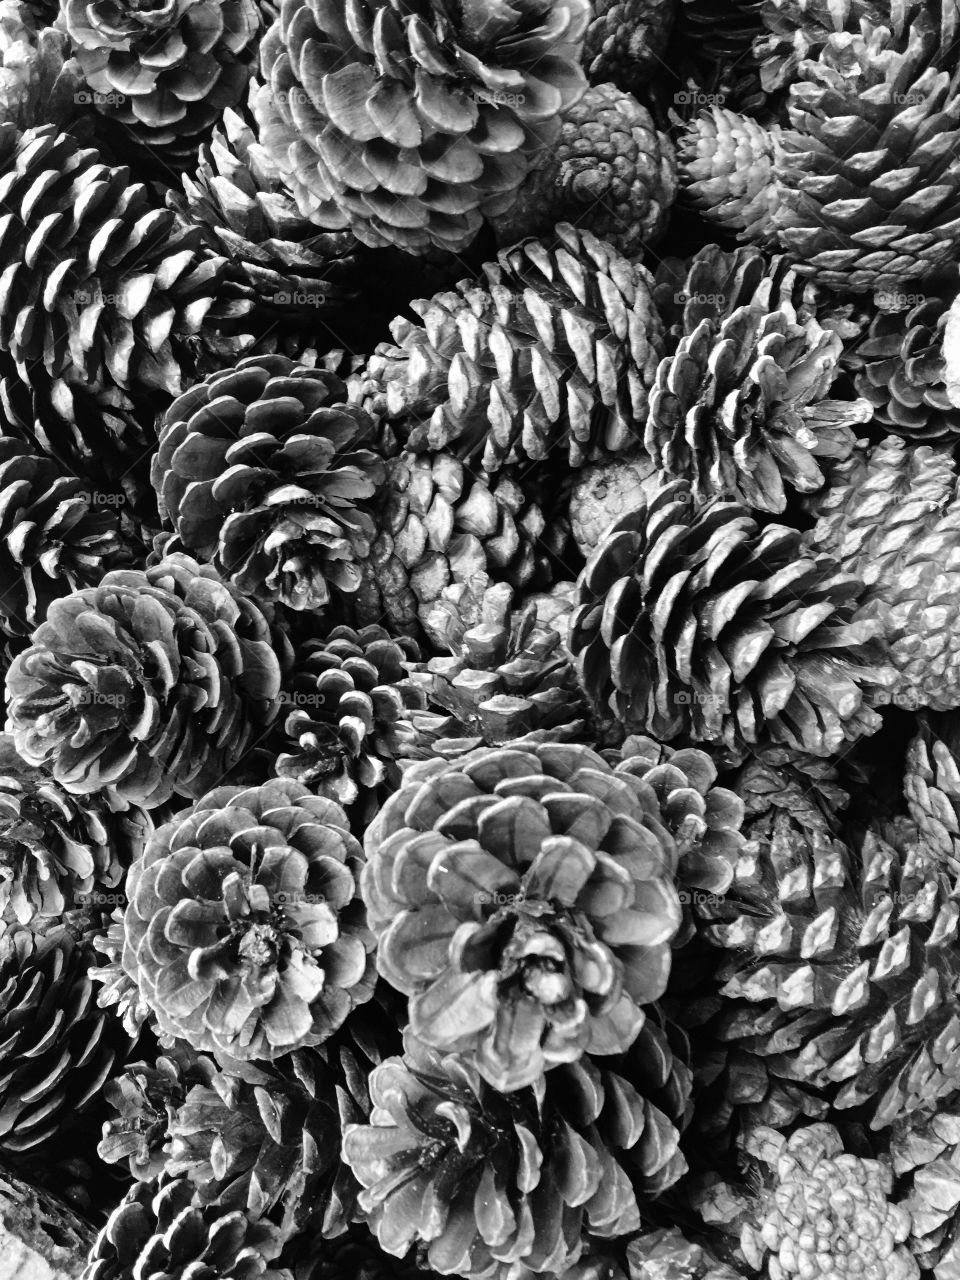 Pinecones in abunadnce